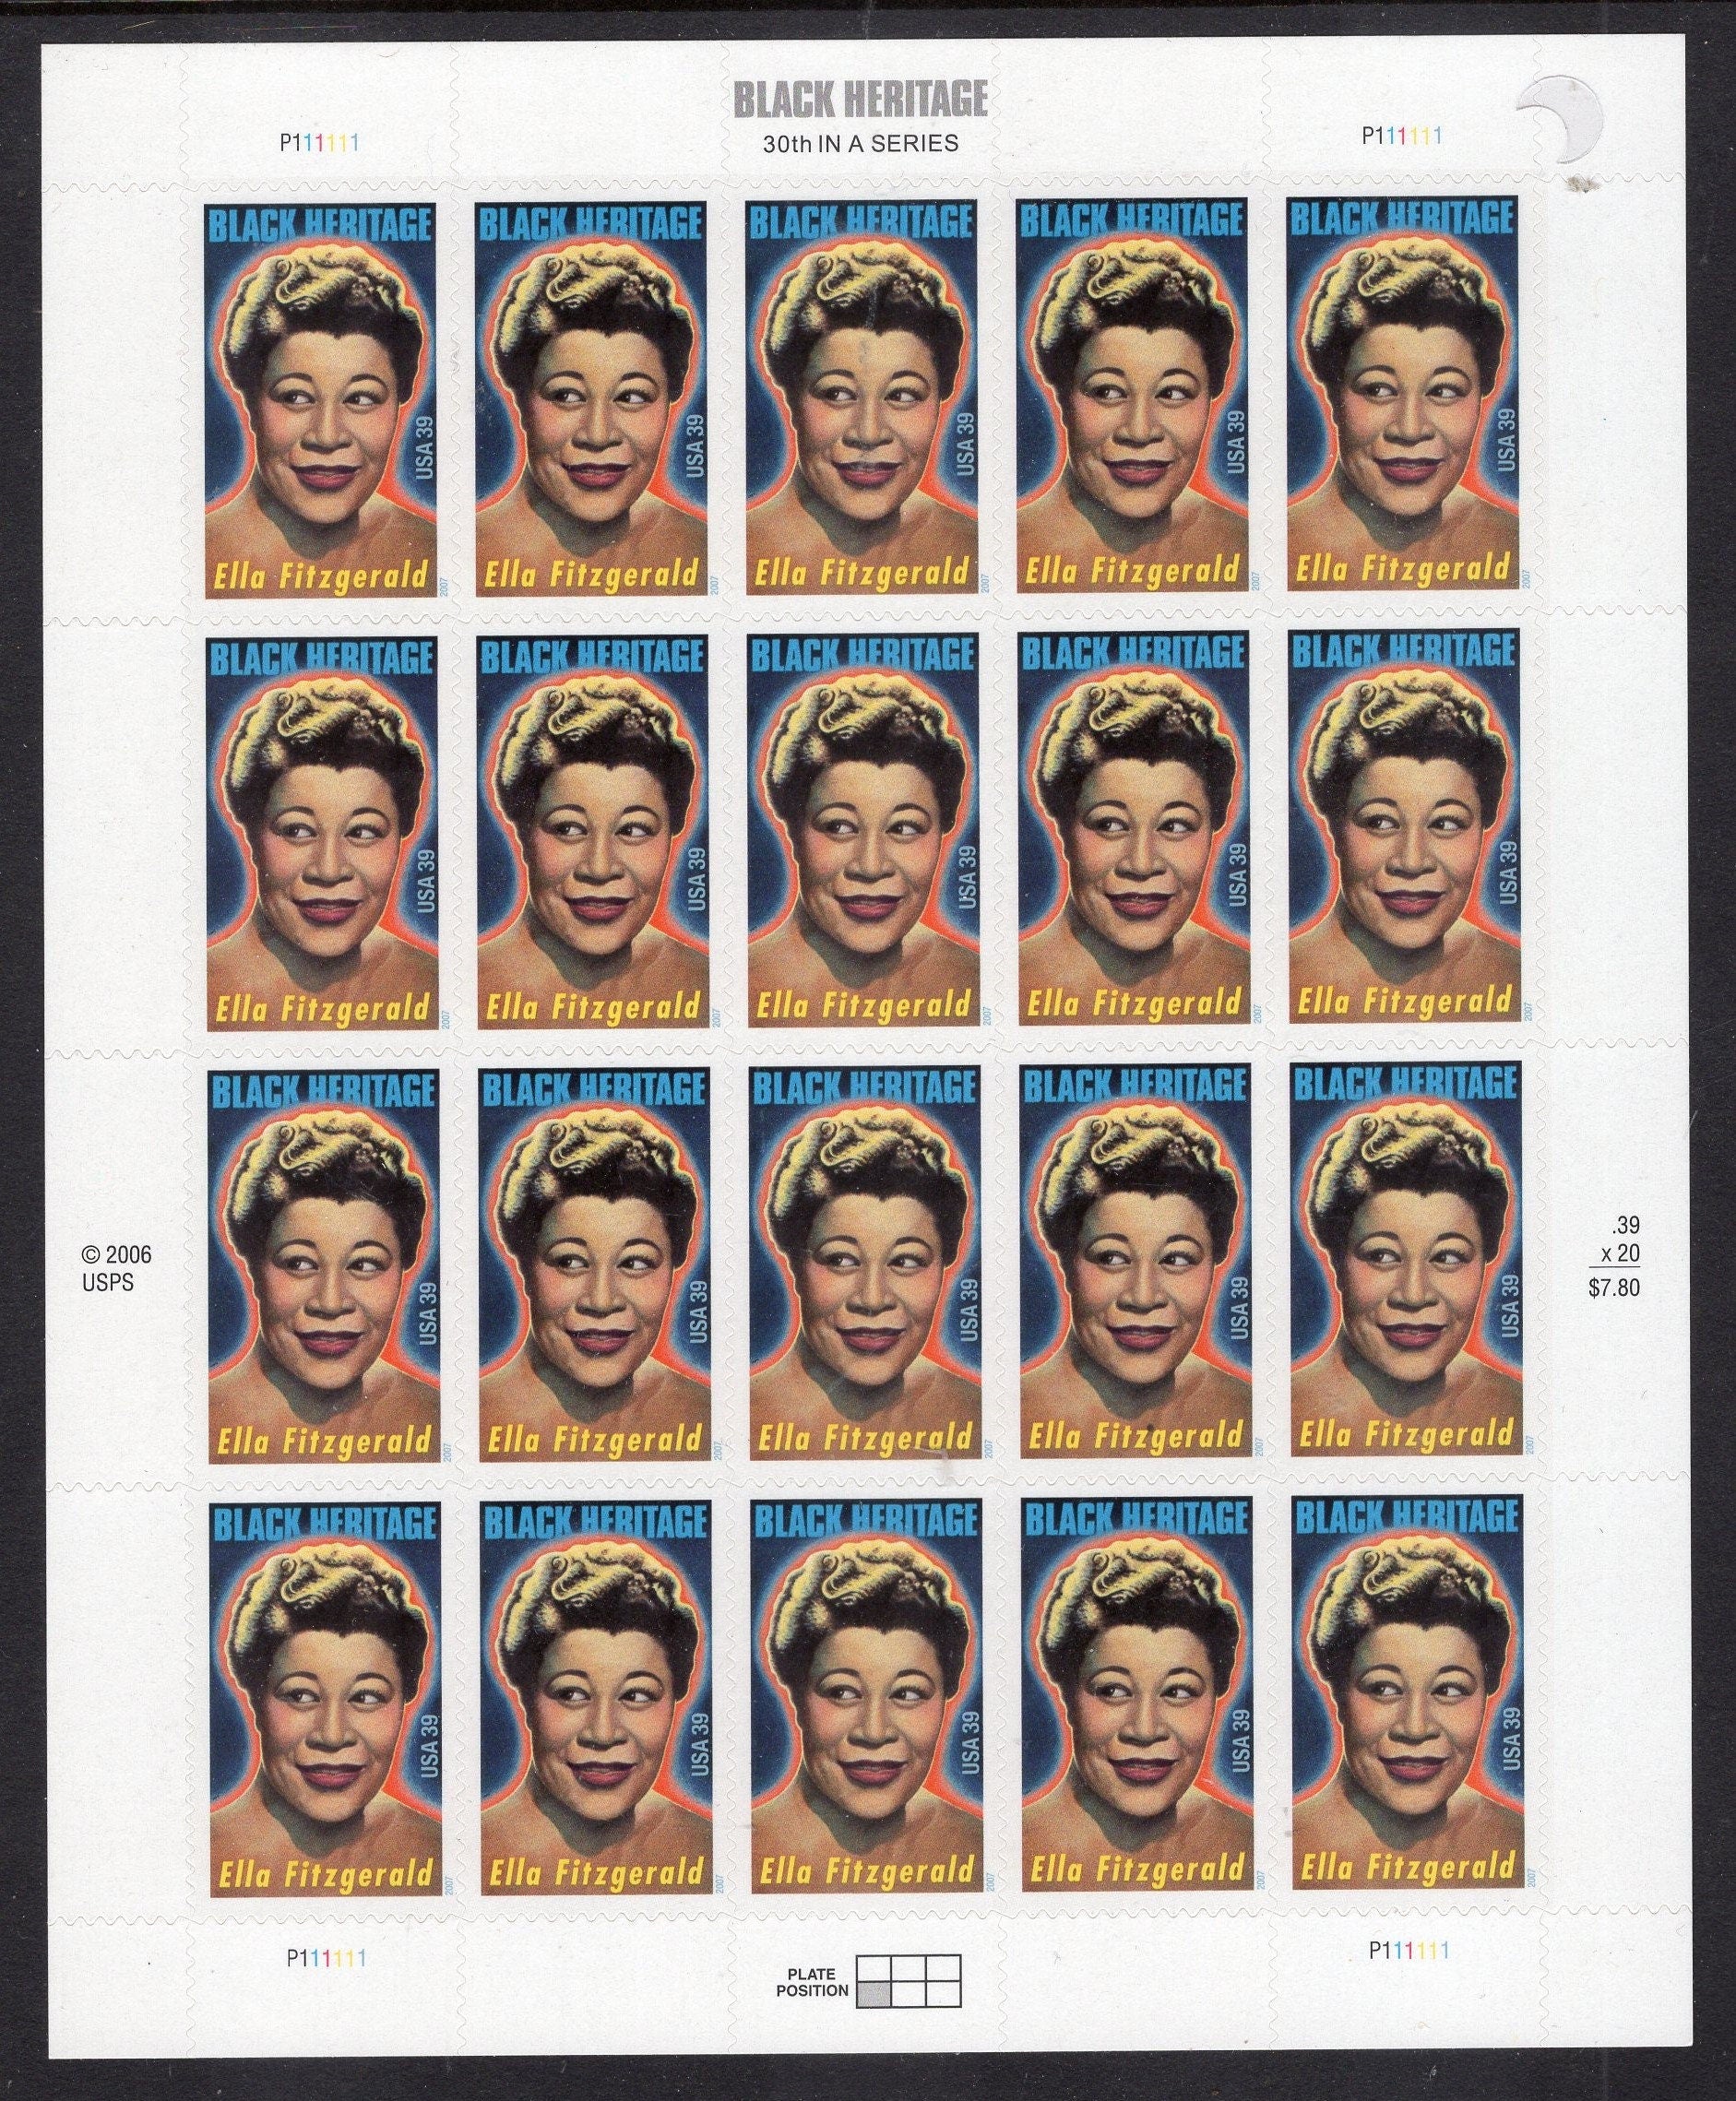 ELLA FITZGERALD HERITAGE Black American Singer Scat Sheet of 20 Stamps Fresh, Bright - Issued in 2007 s4120 -